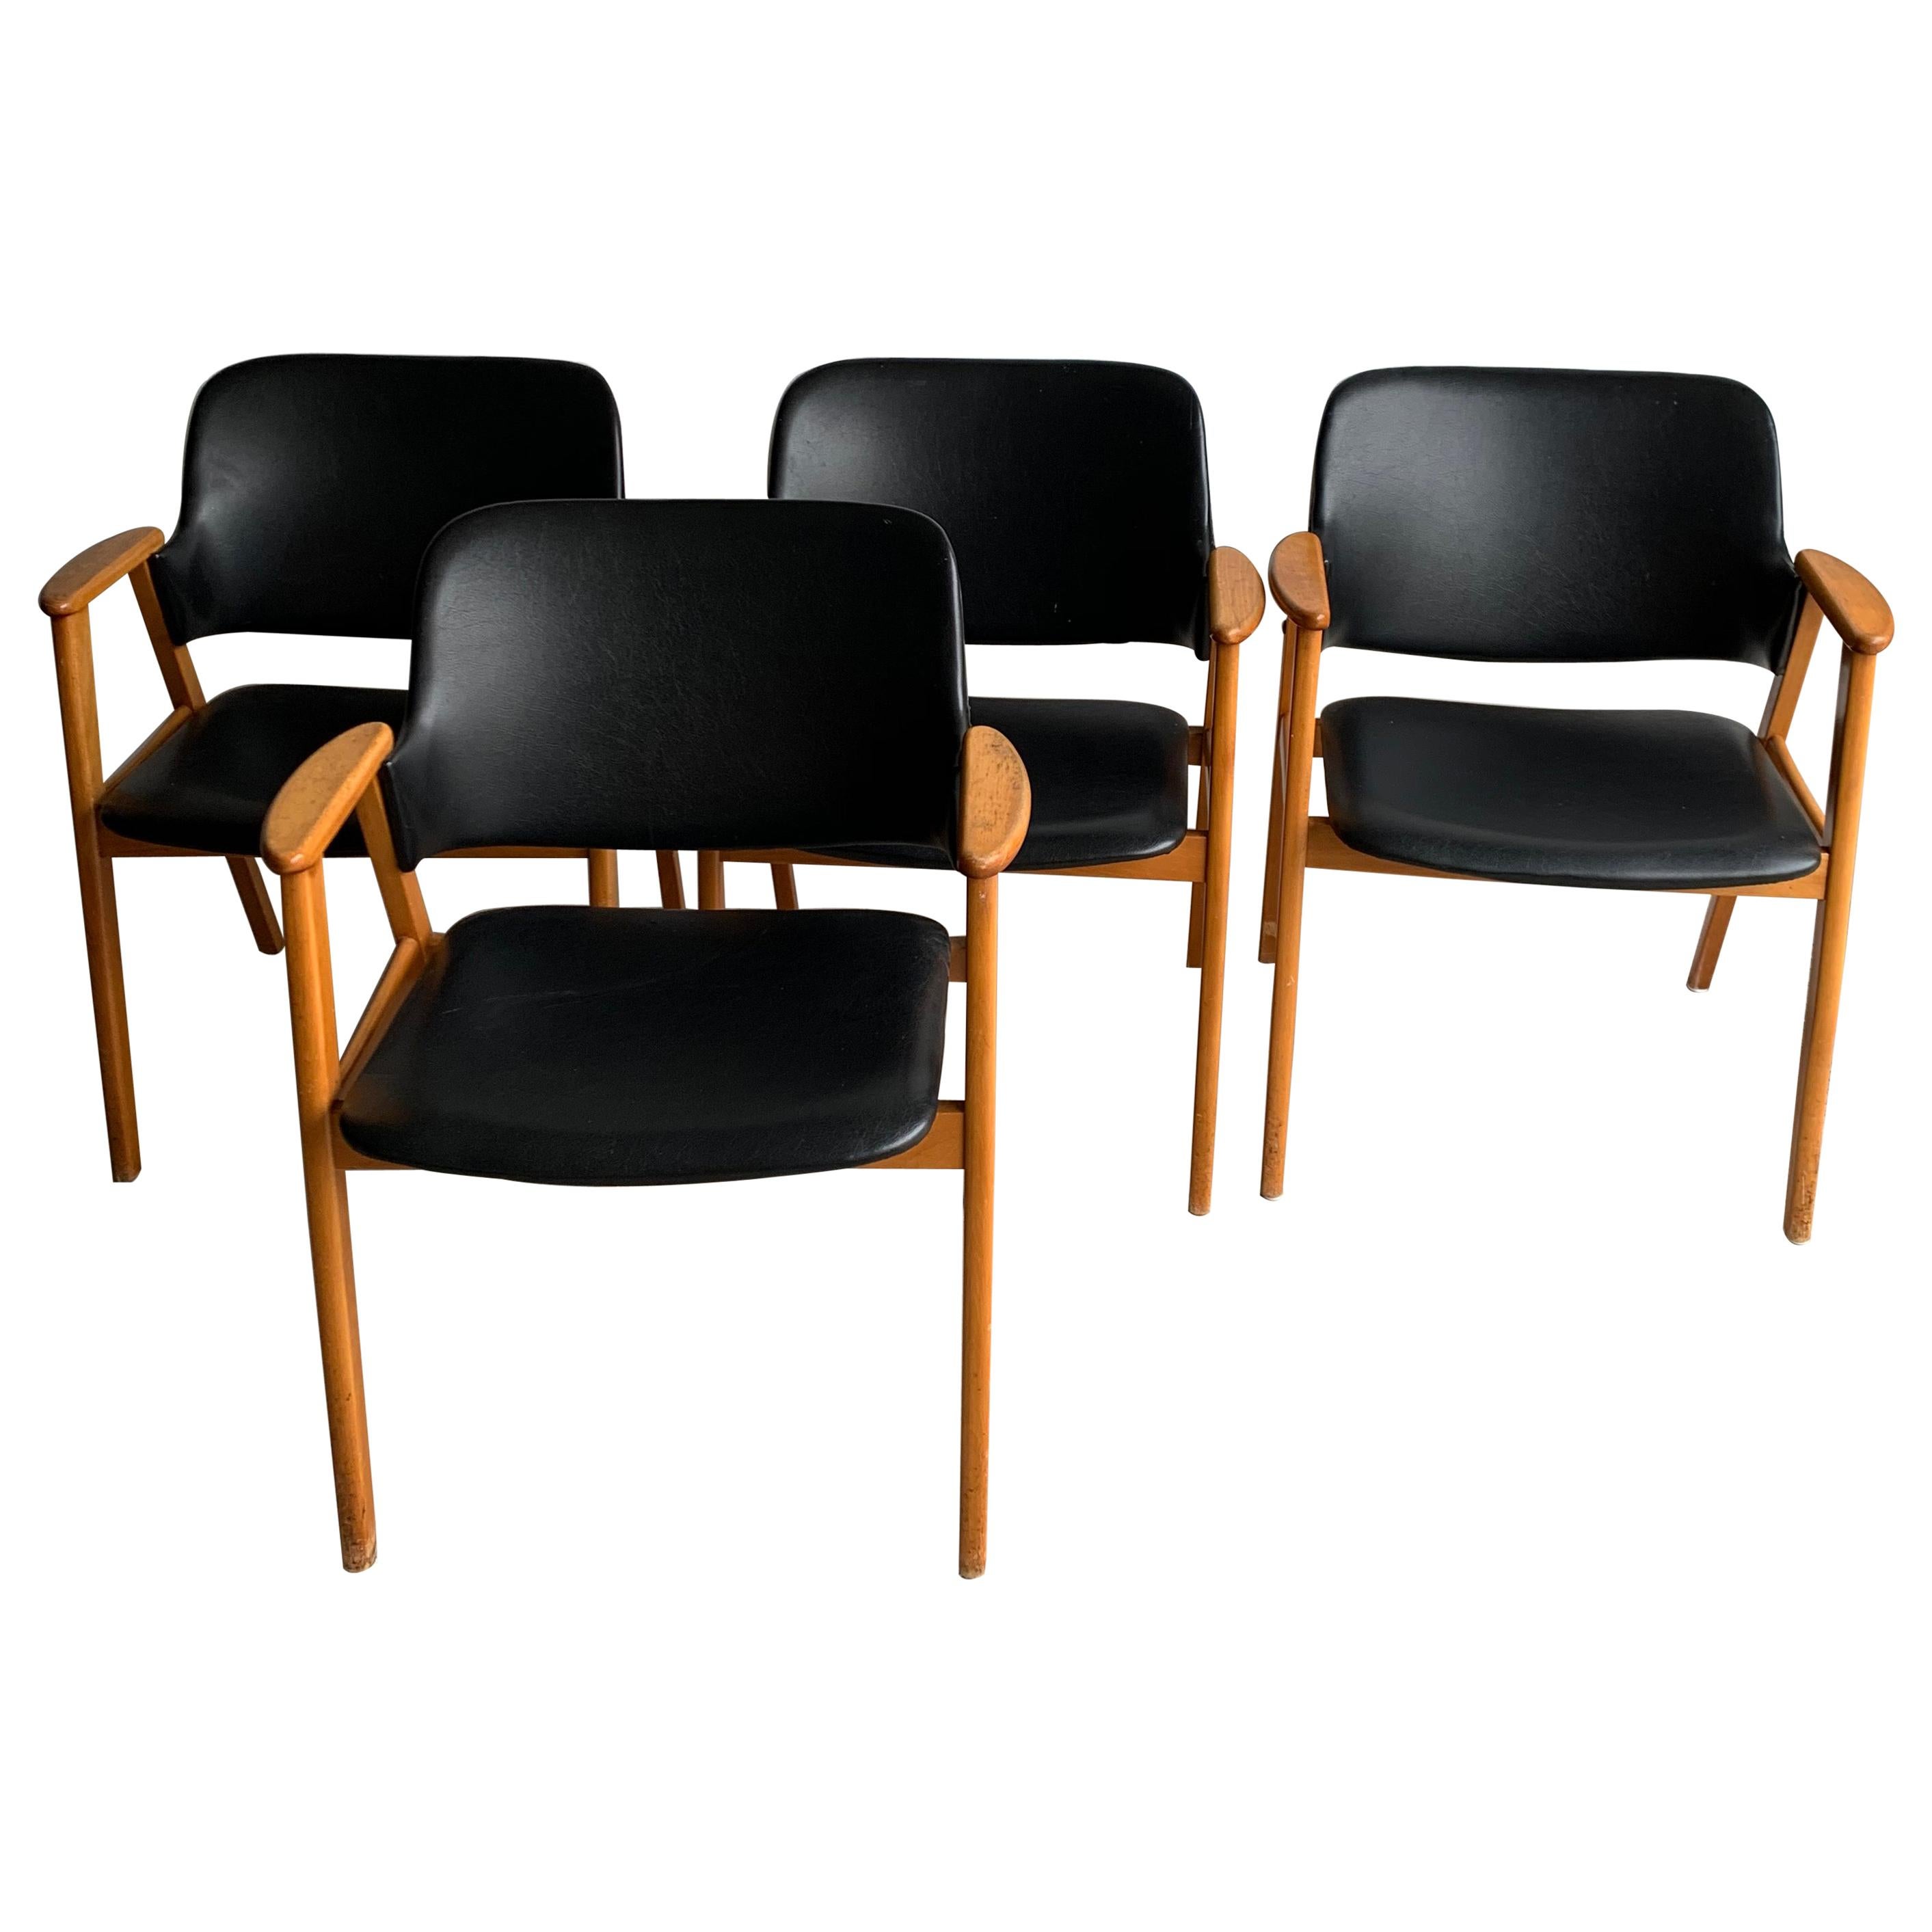 20th Century Black Birch Dining Chairs by Cees Braakman for Pastoe, 1950s